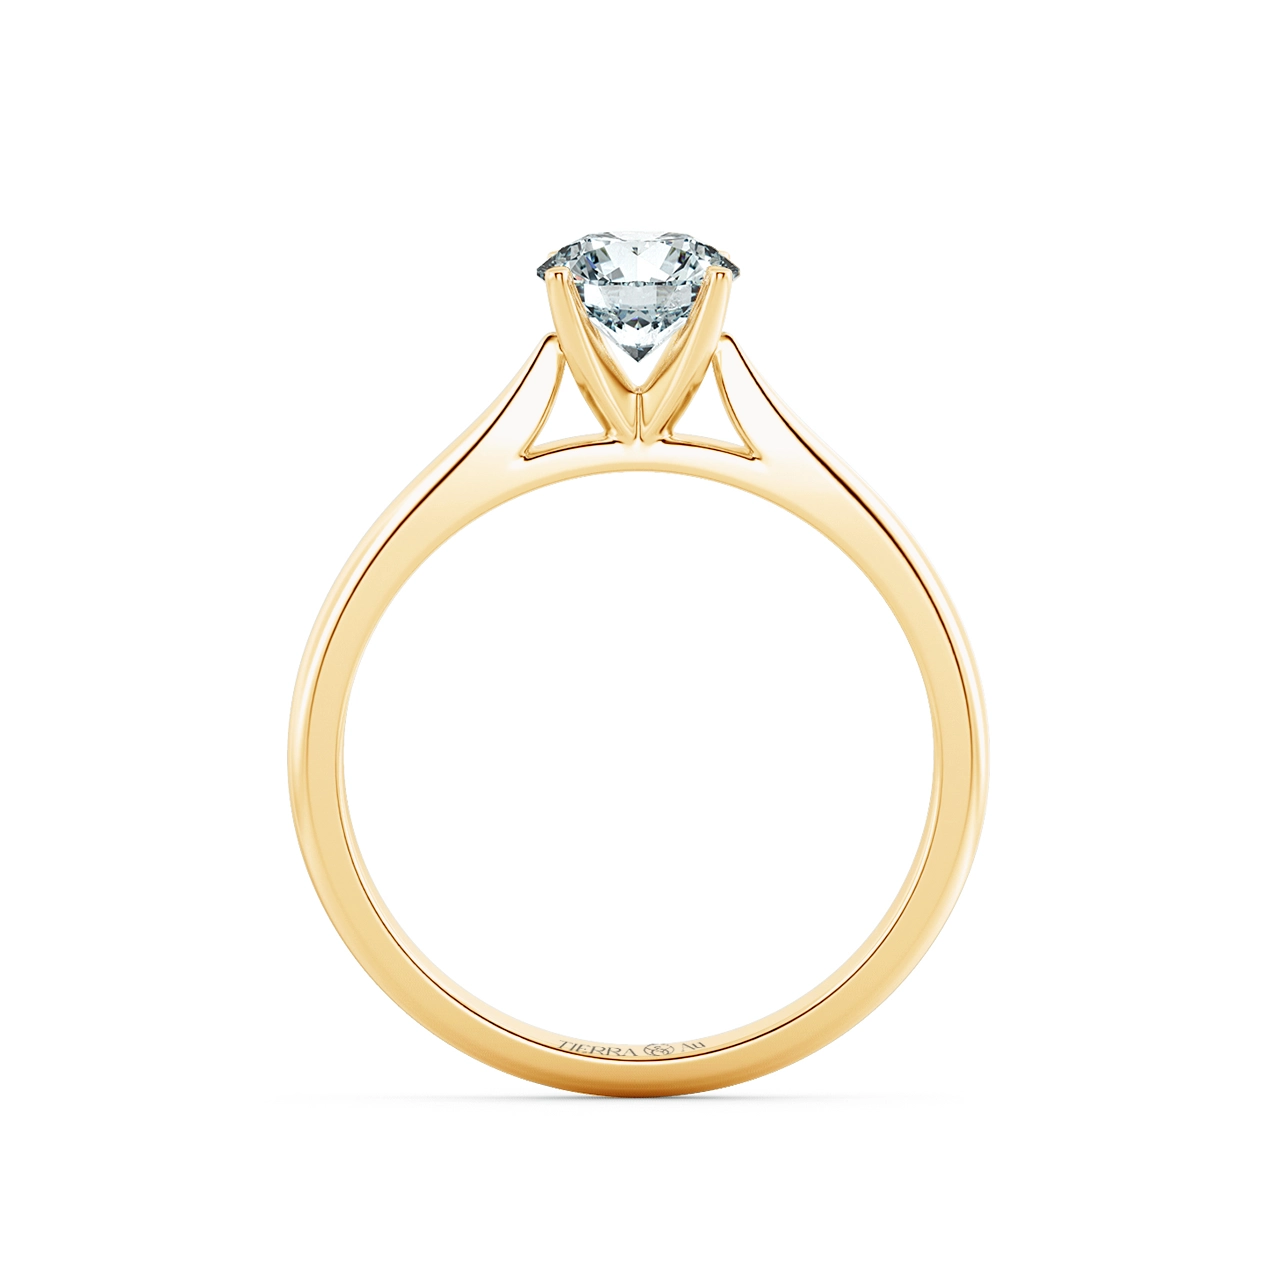 Basic Shiny Cathedral Engagement Ring with Four Prong Setting NCH1501 5